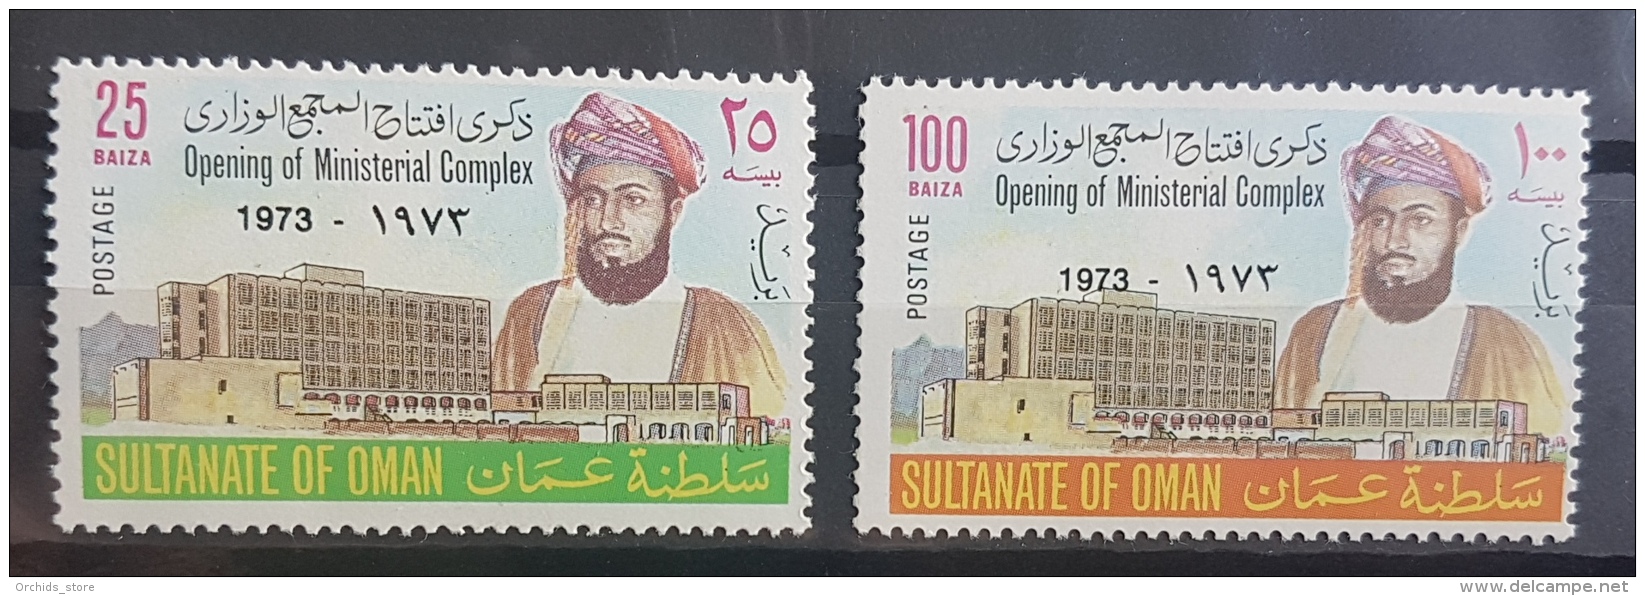 HX35 - Oman 1973 Mi 153/154 Complete Set 2v. MNH - Opening Of Ministerial Complex - Oman